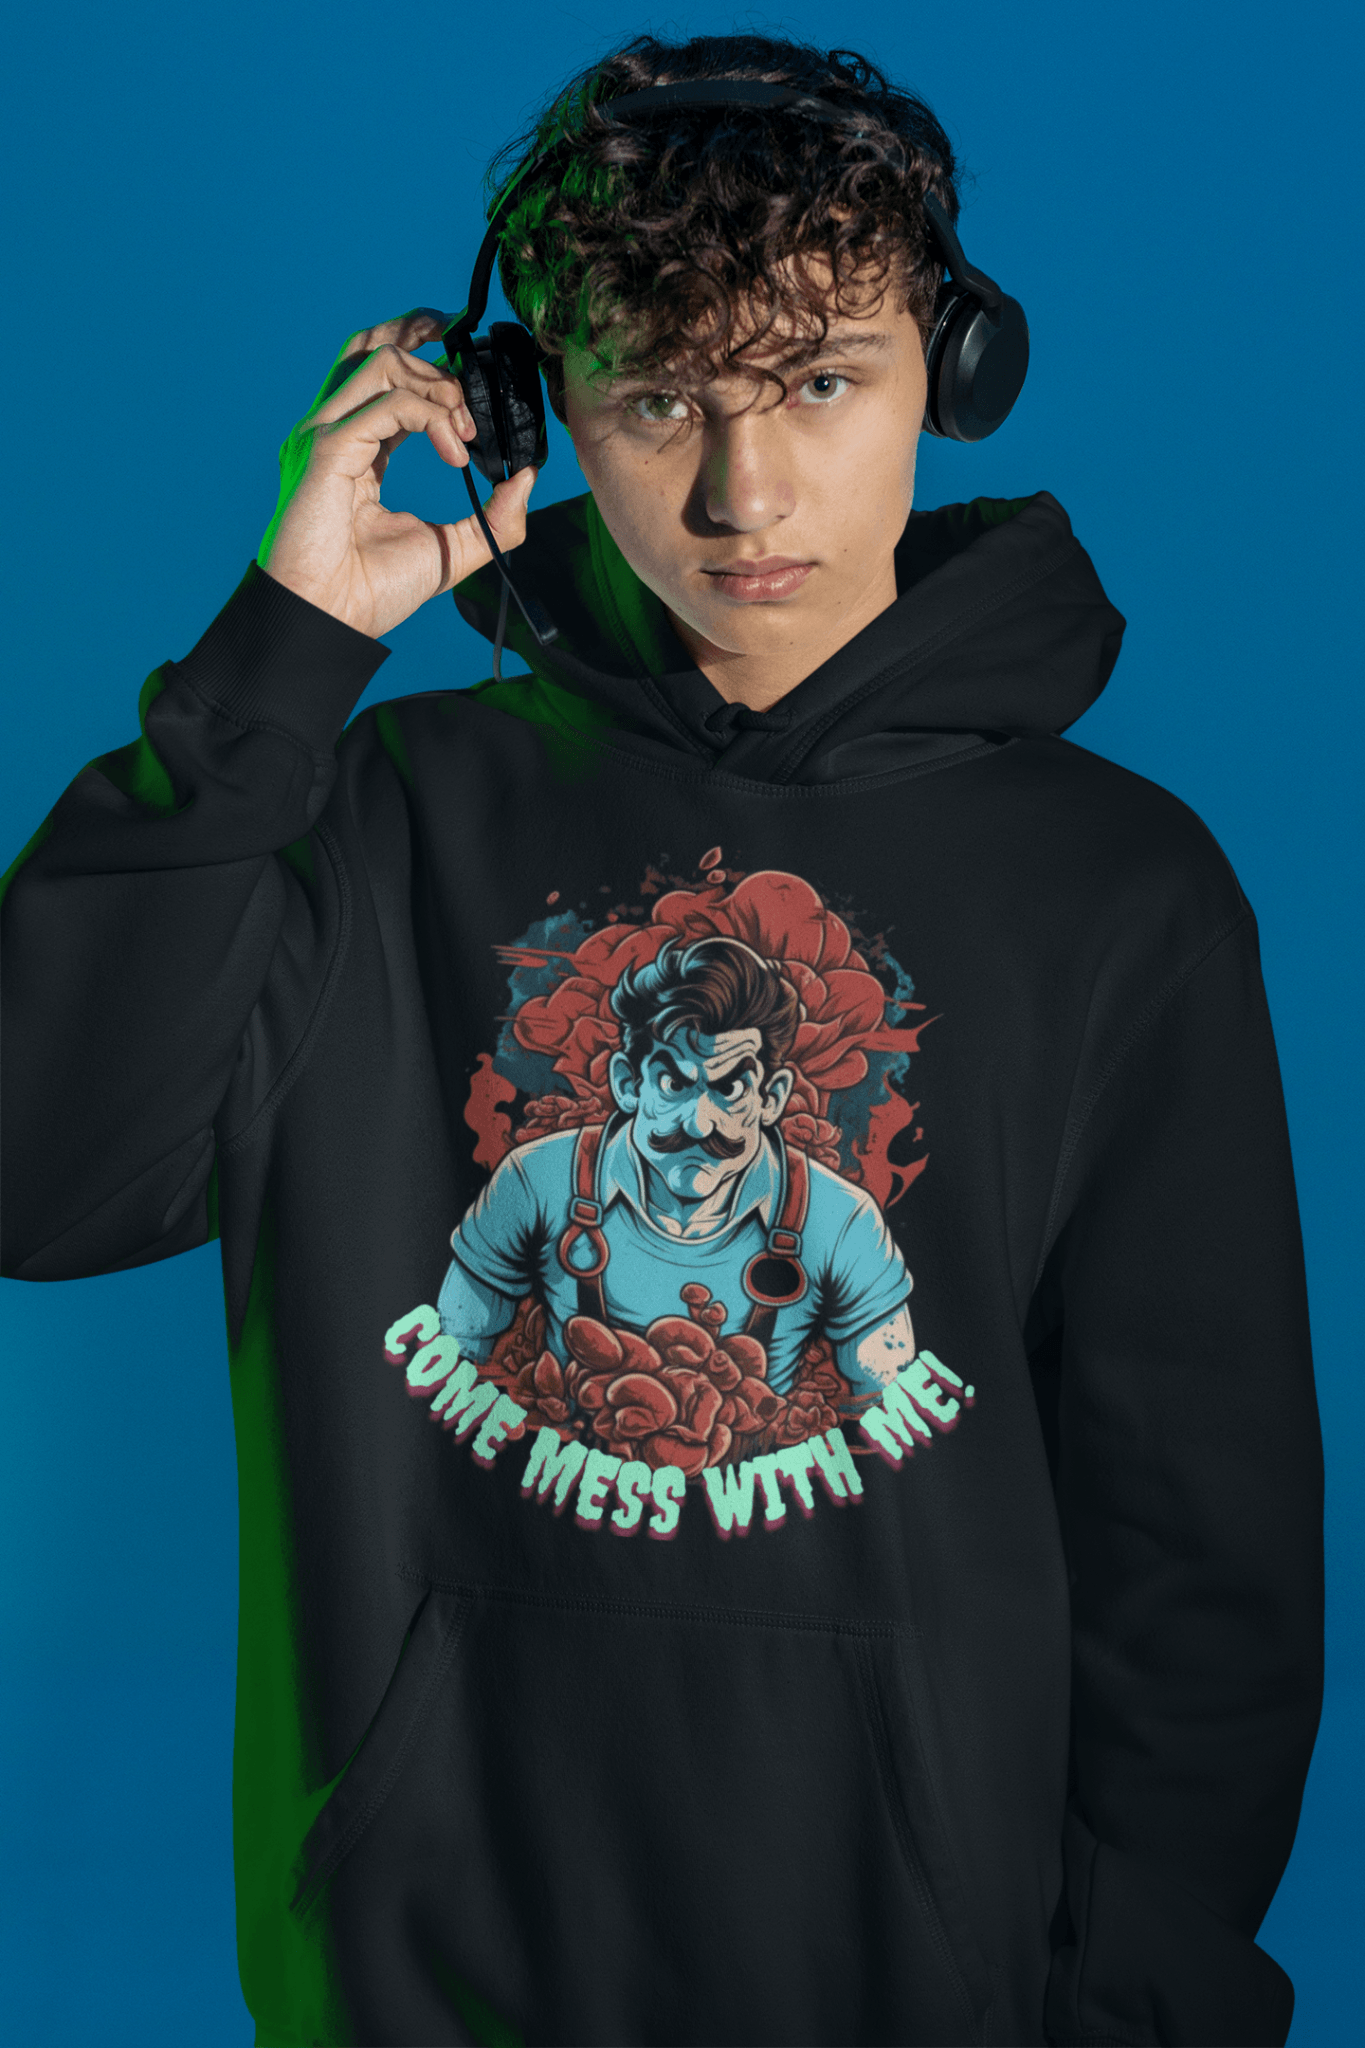 Mess with me - Oversized Hoodie - GAMECHARM